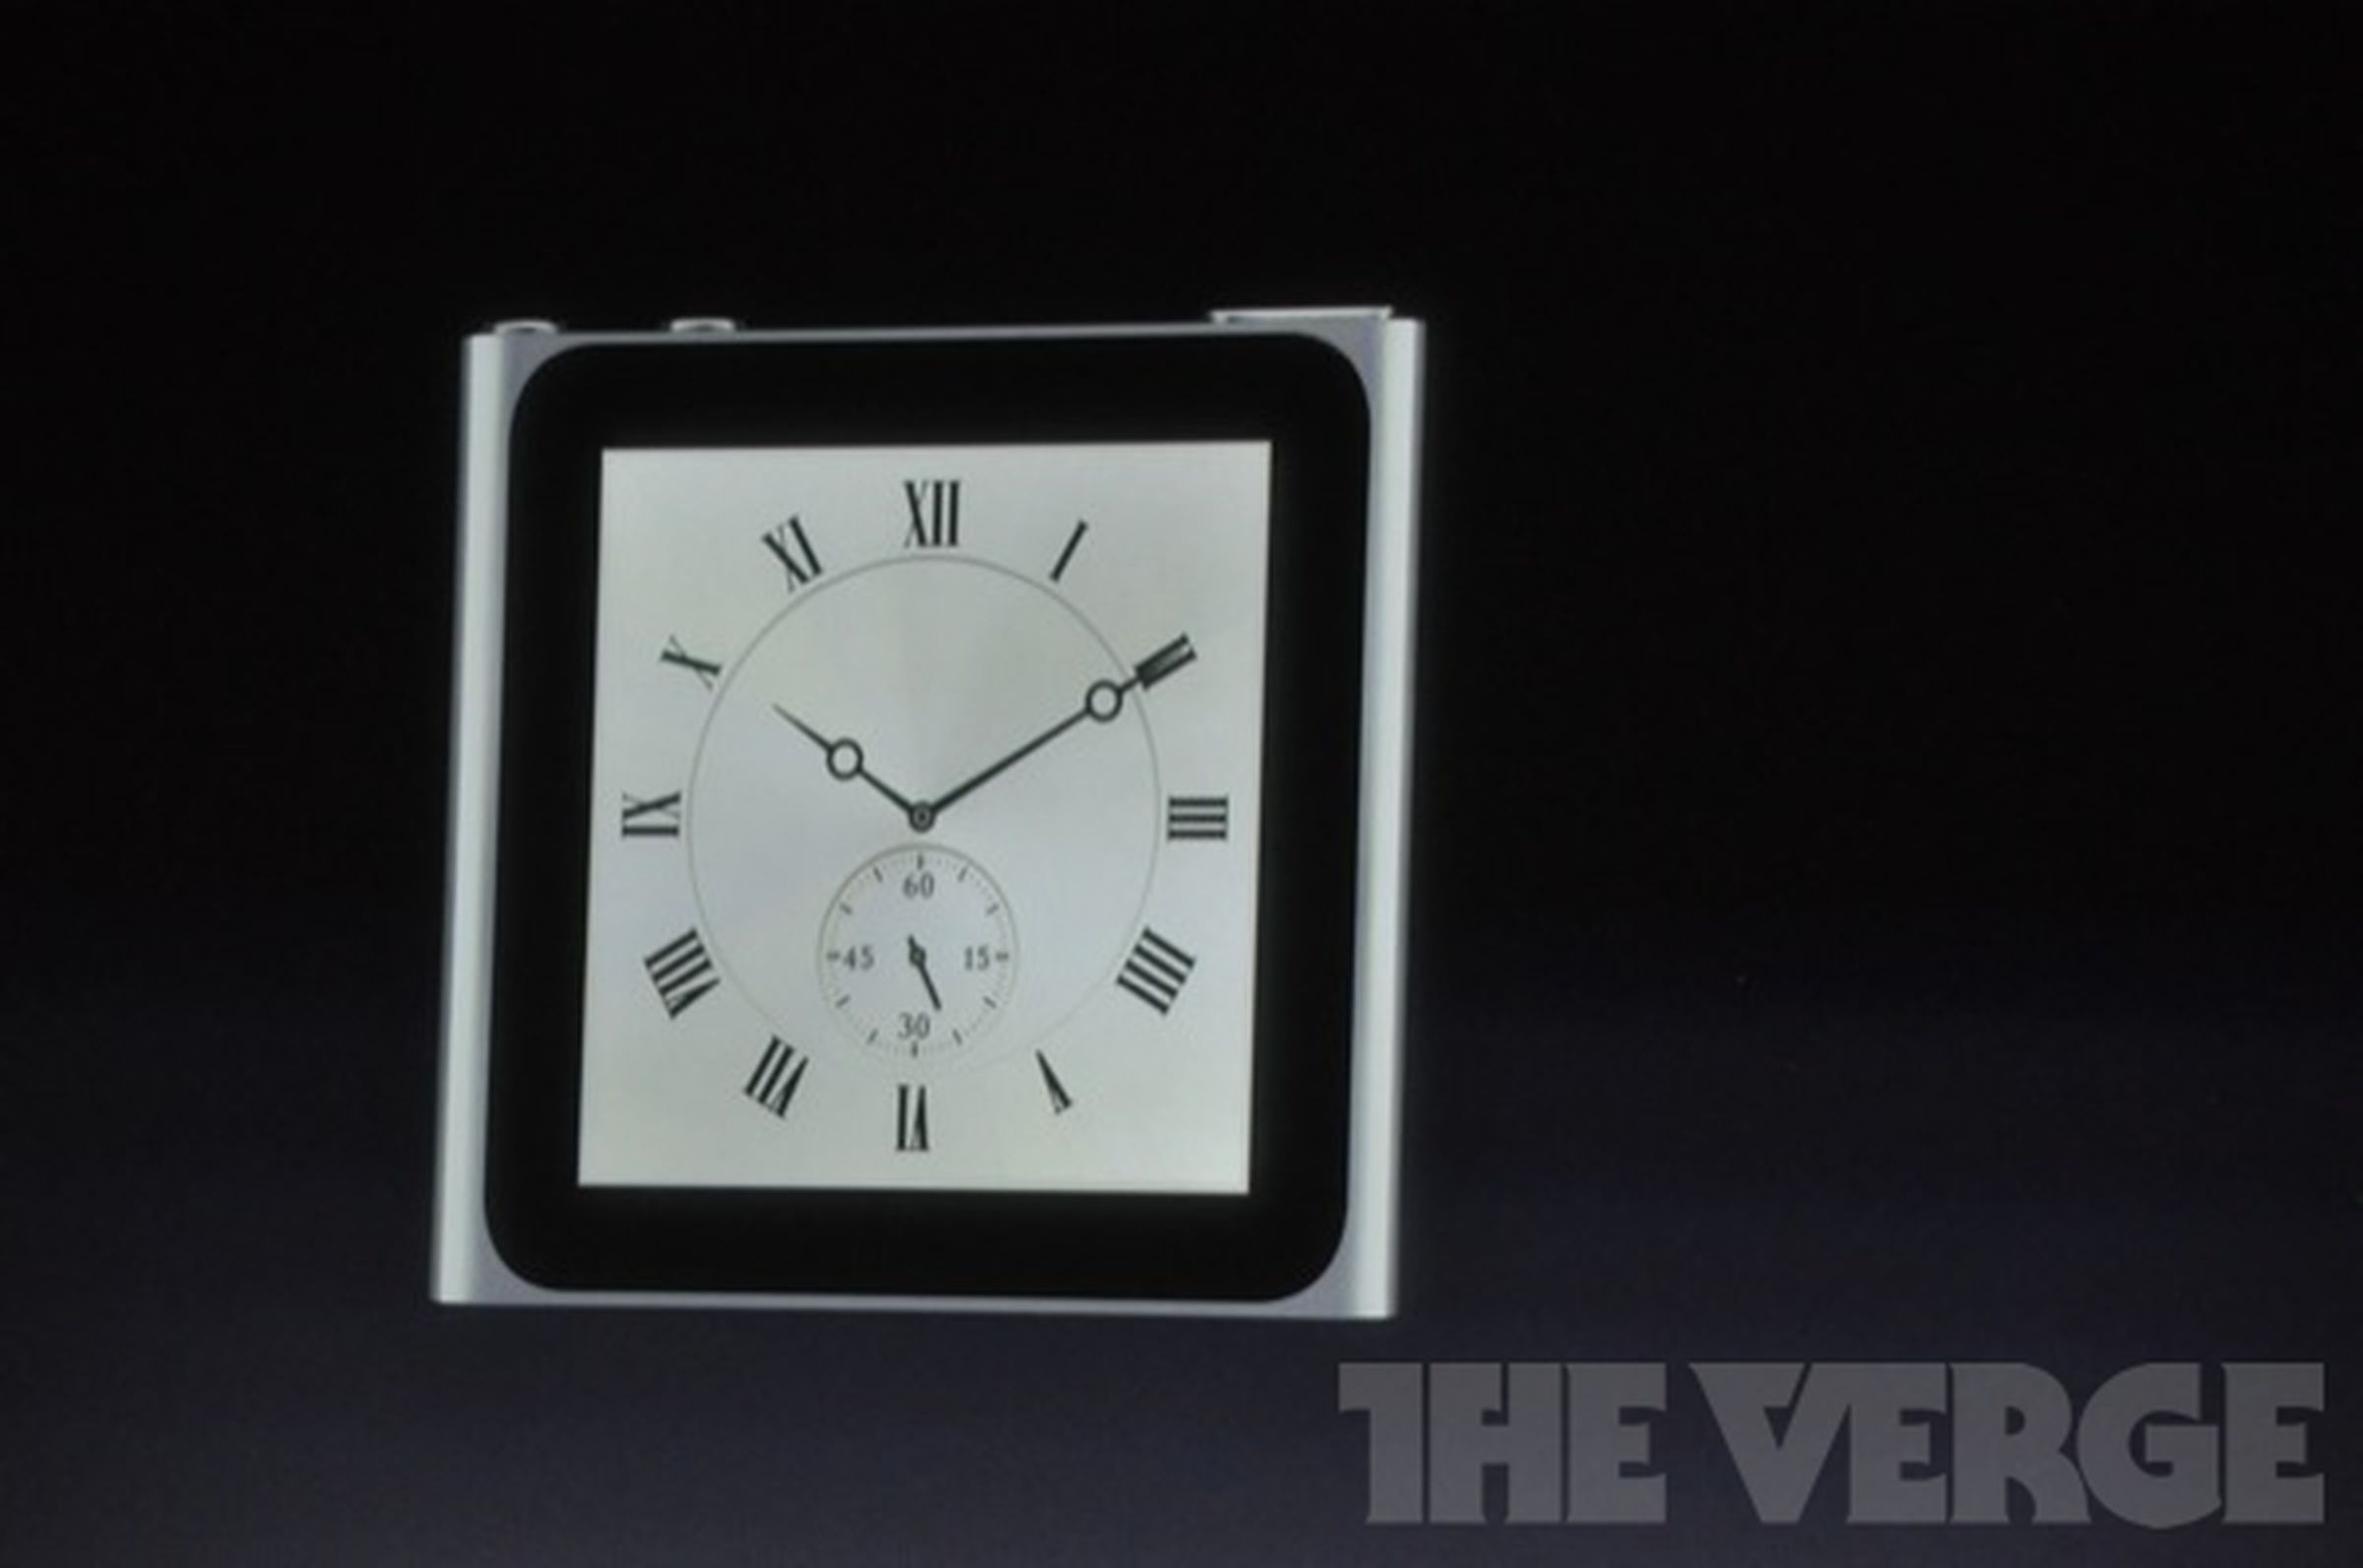 Apple’s new iPod nano bolsters watch functionality, available today